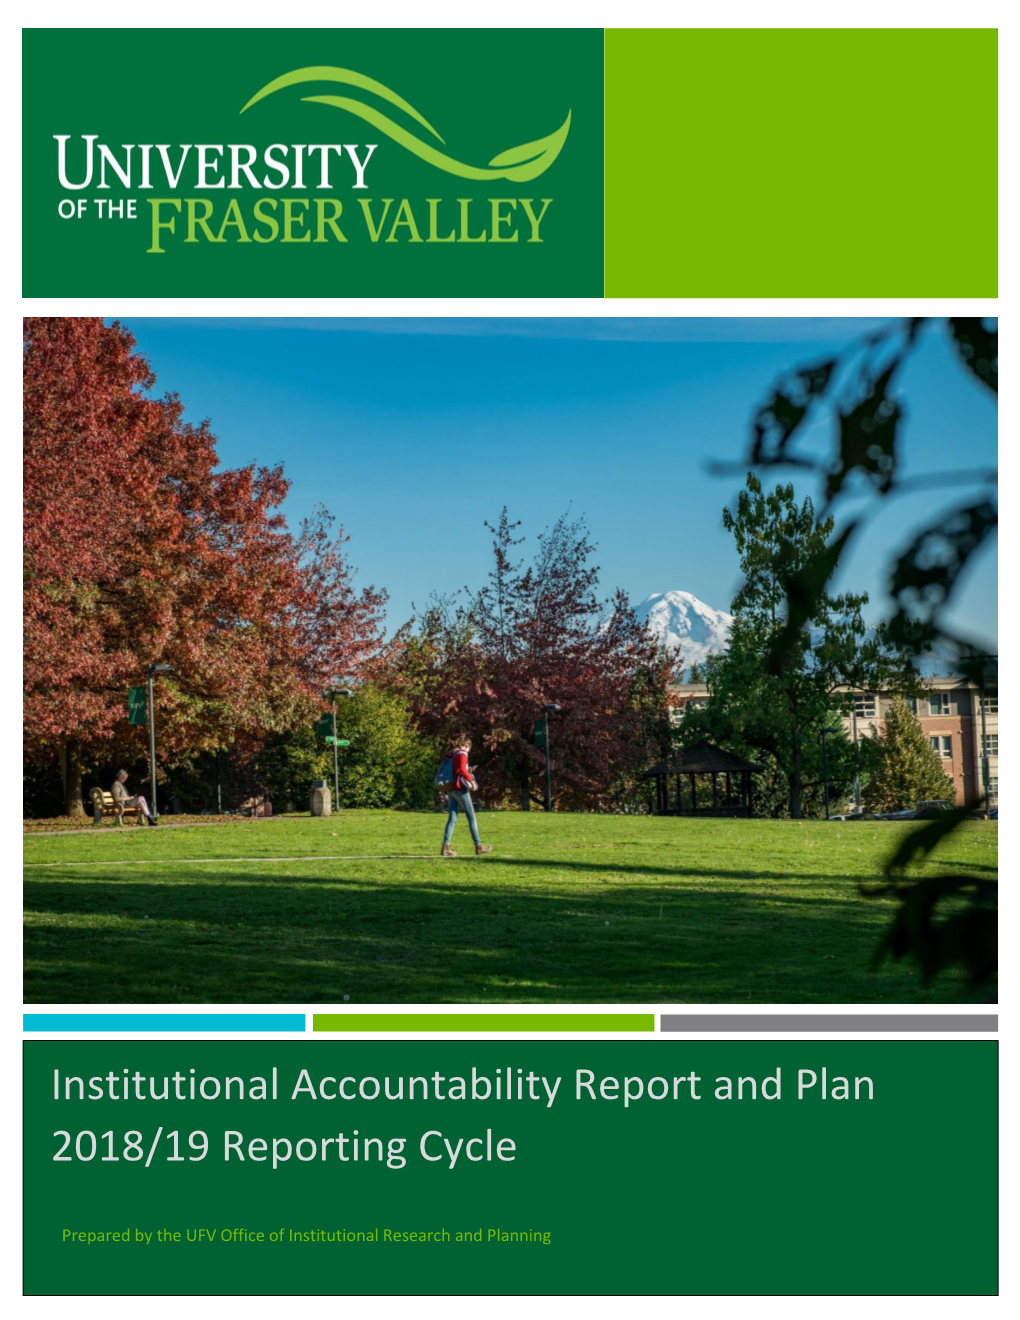 Institutional Accountability Report and Plan 2018/19 Reporting Cycle